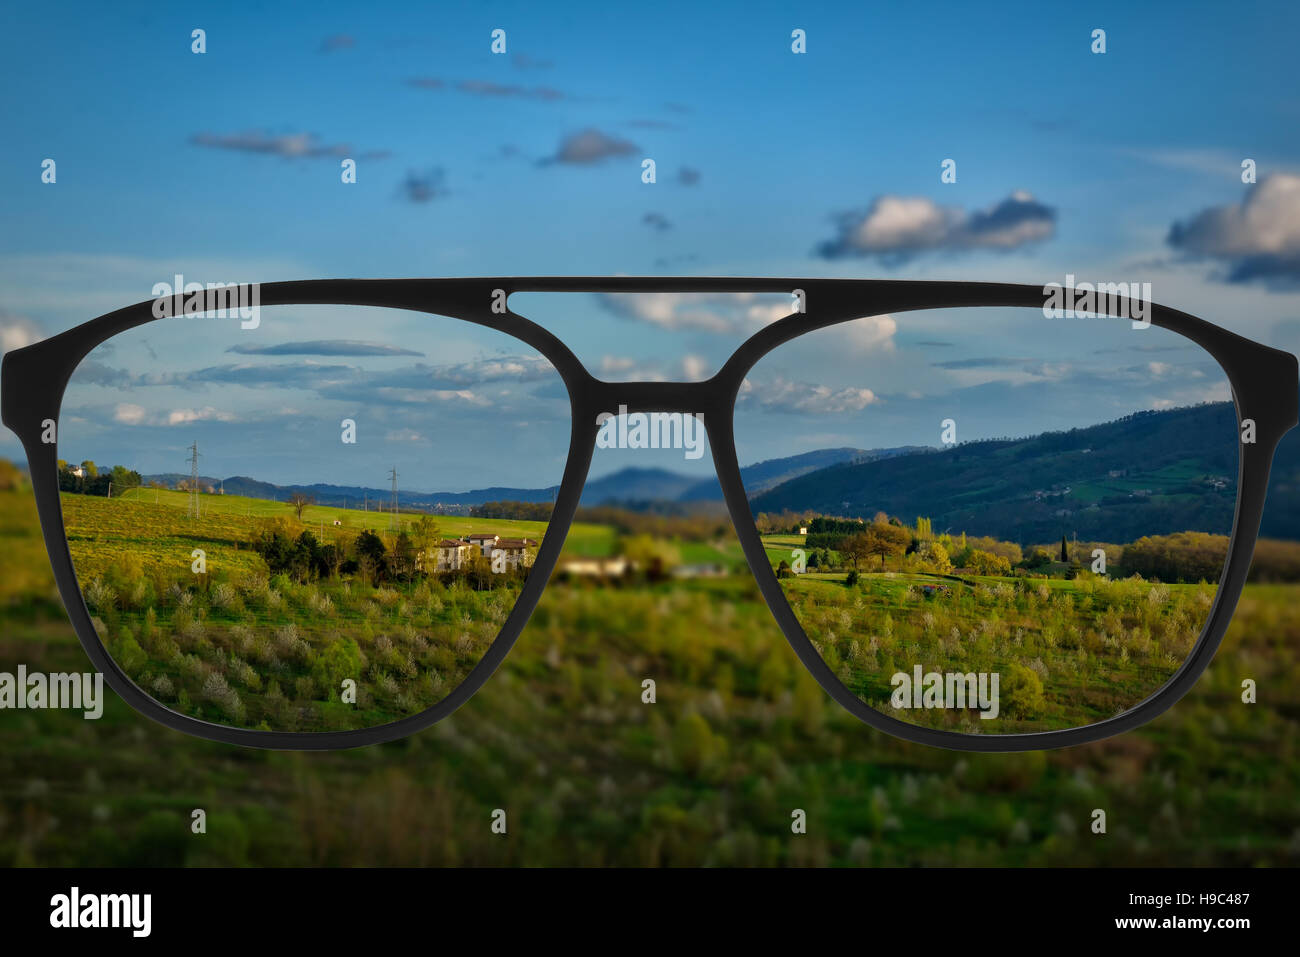 Clear image in glasses against blurry landscape Stock Photo